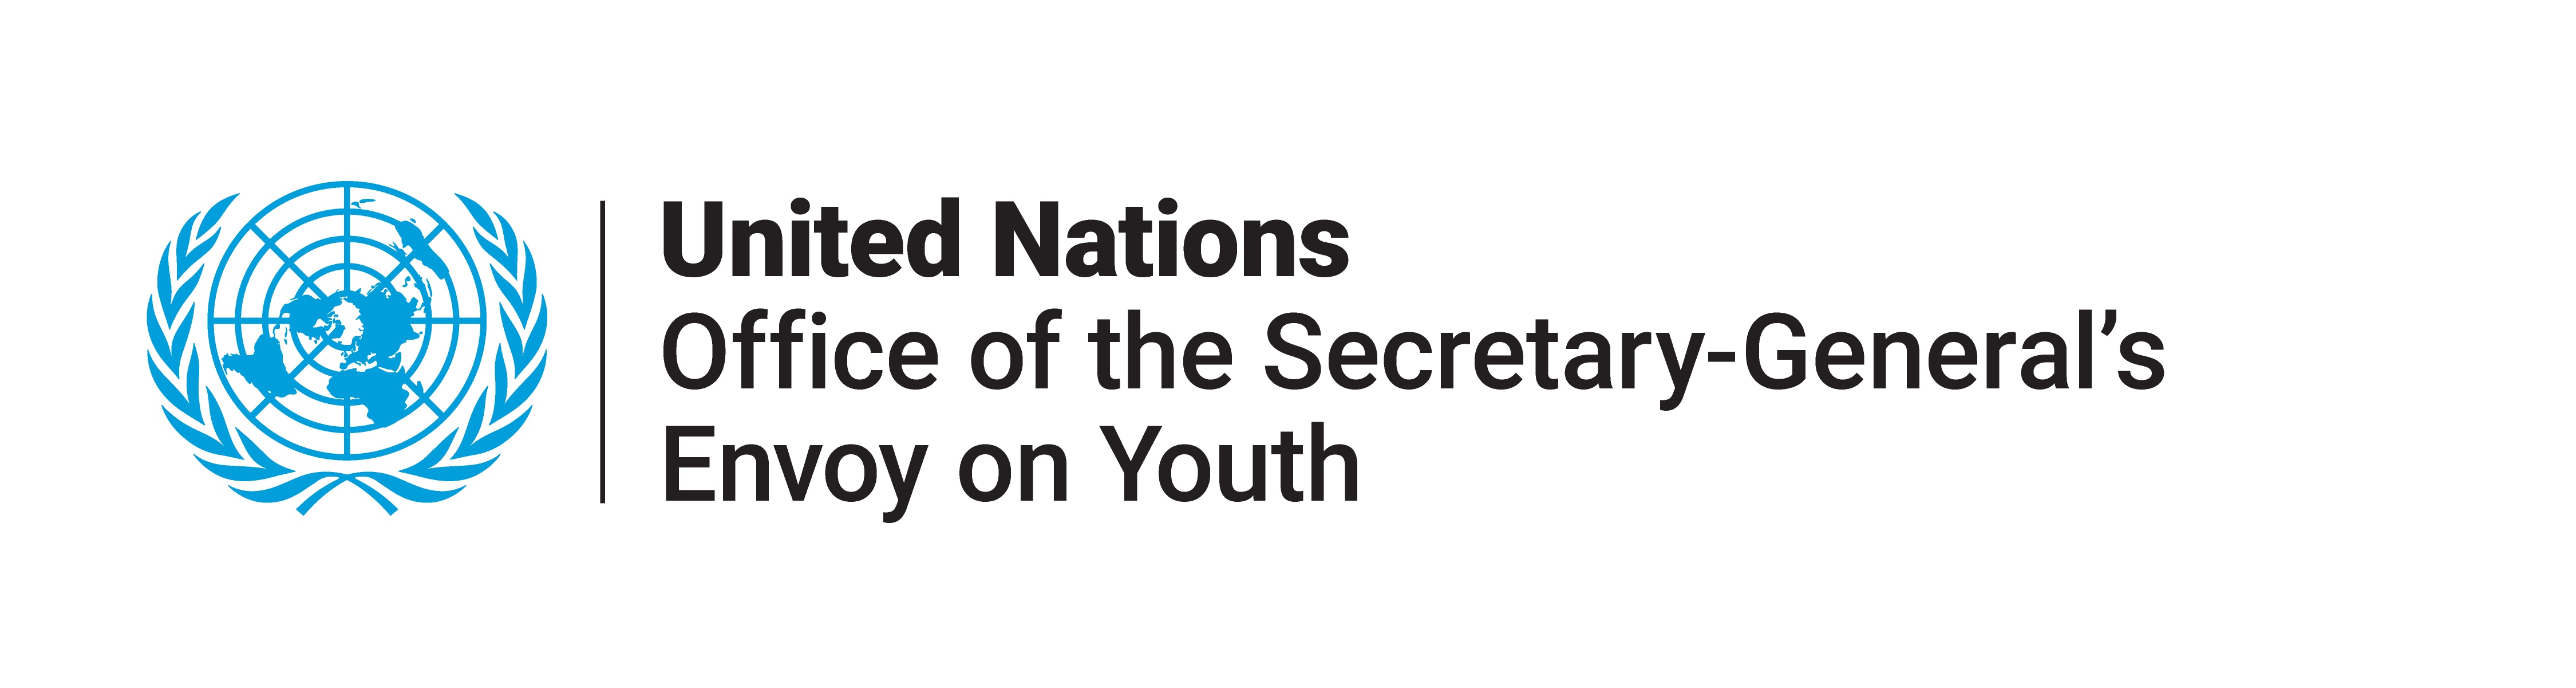 United Nations Office of the Secretary-General's Envoy on Youth